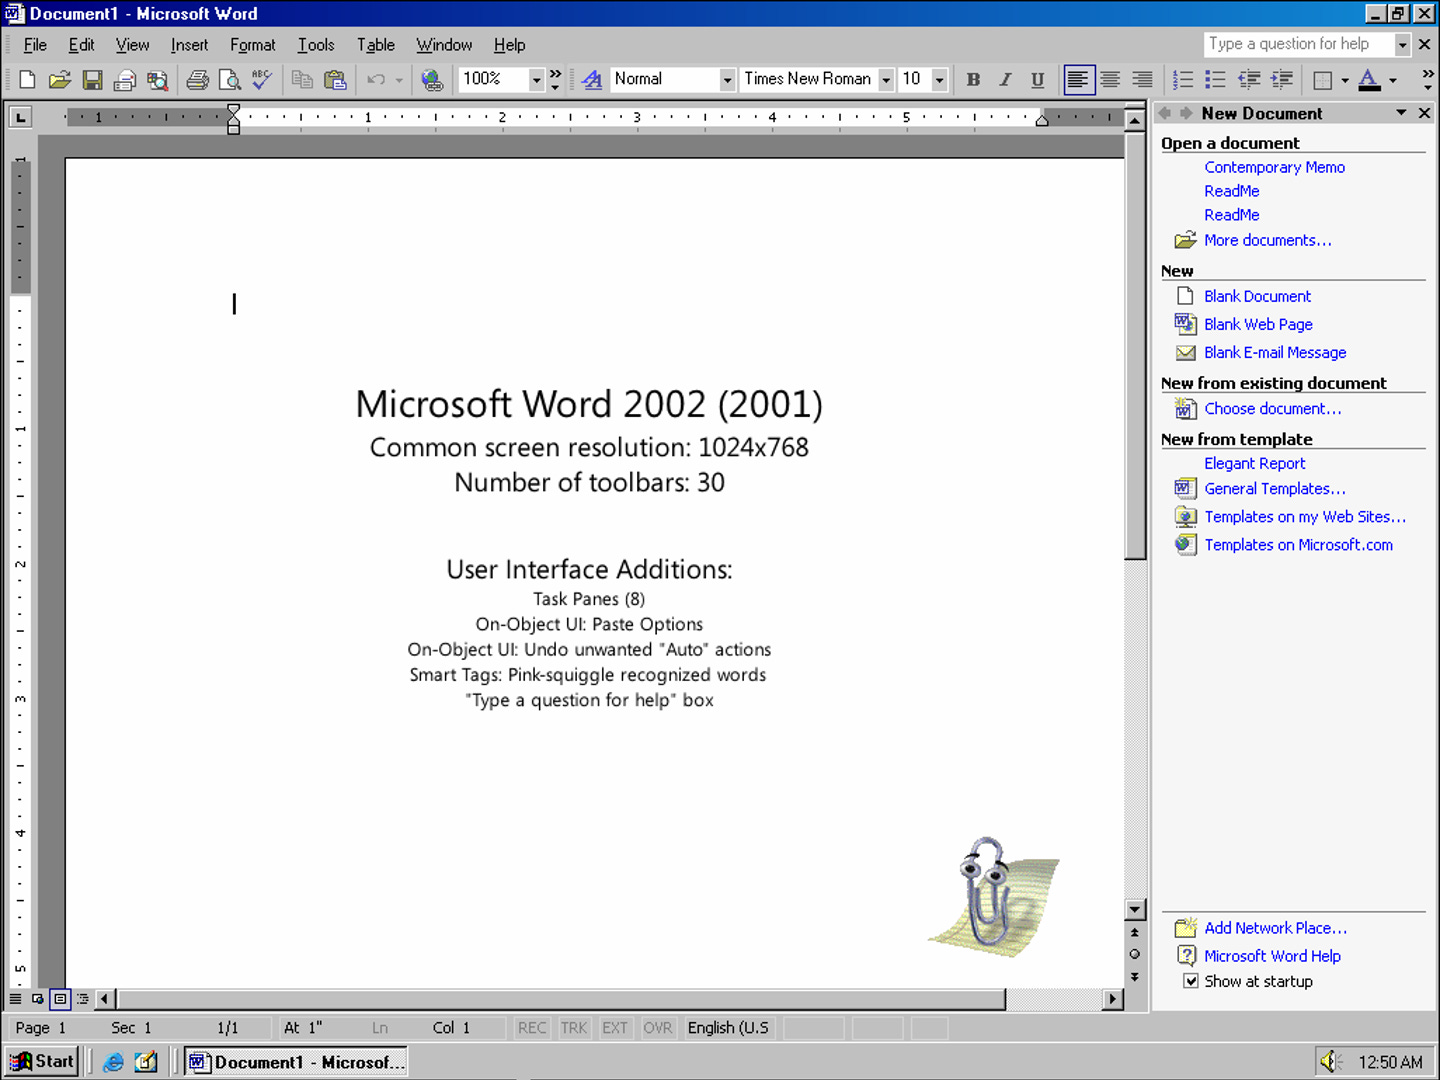 Microsoft Word 2002 (2001) Common screen resolution: 1024x768 Number of toolbars: 30 Tupe a question for helo 三洋重至 New Document Open a document Contemporary Memo ReadMe Readme D More documents... New 19 Blank Document W.] Blank Web Page M Blank E-mail Message New from existing document 191 Choose document... New from template Elegant Report mi General Templates... • Templates on my Web Sites... Templates on Microsoft.com -Ex X X User Interface Additions: Task Panes (8) On-Obiect UI: Paste Options On-Object Ul: Undo unwanted "Auto" actions Smart Tags: Pink-squiggle recognized words "Type a question for help" box